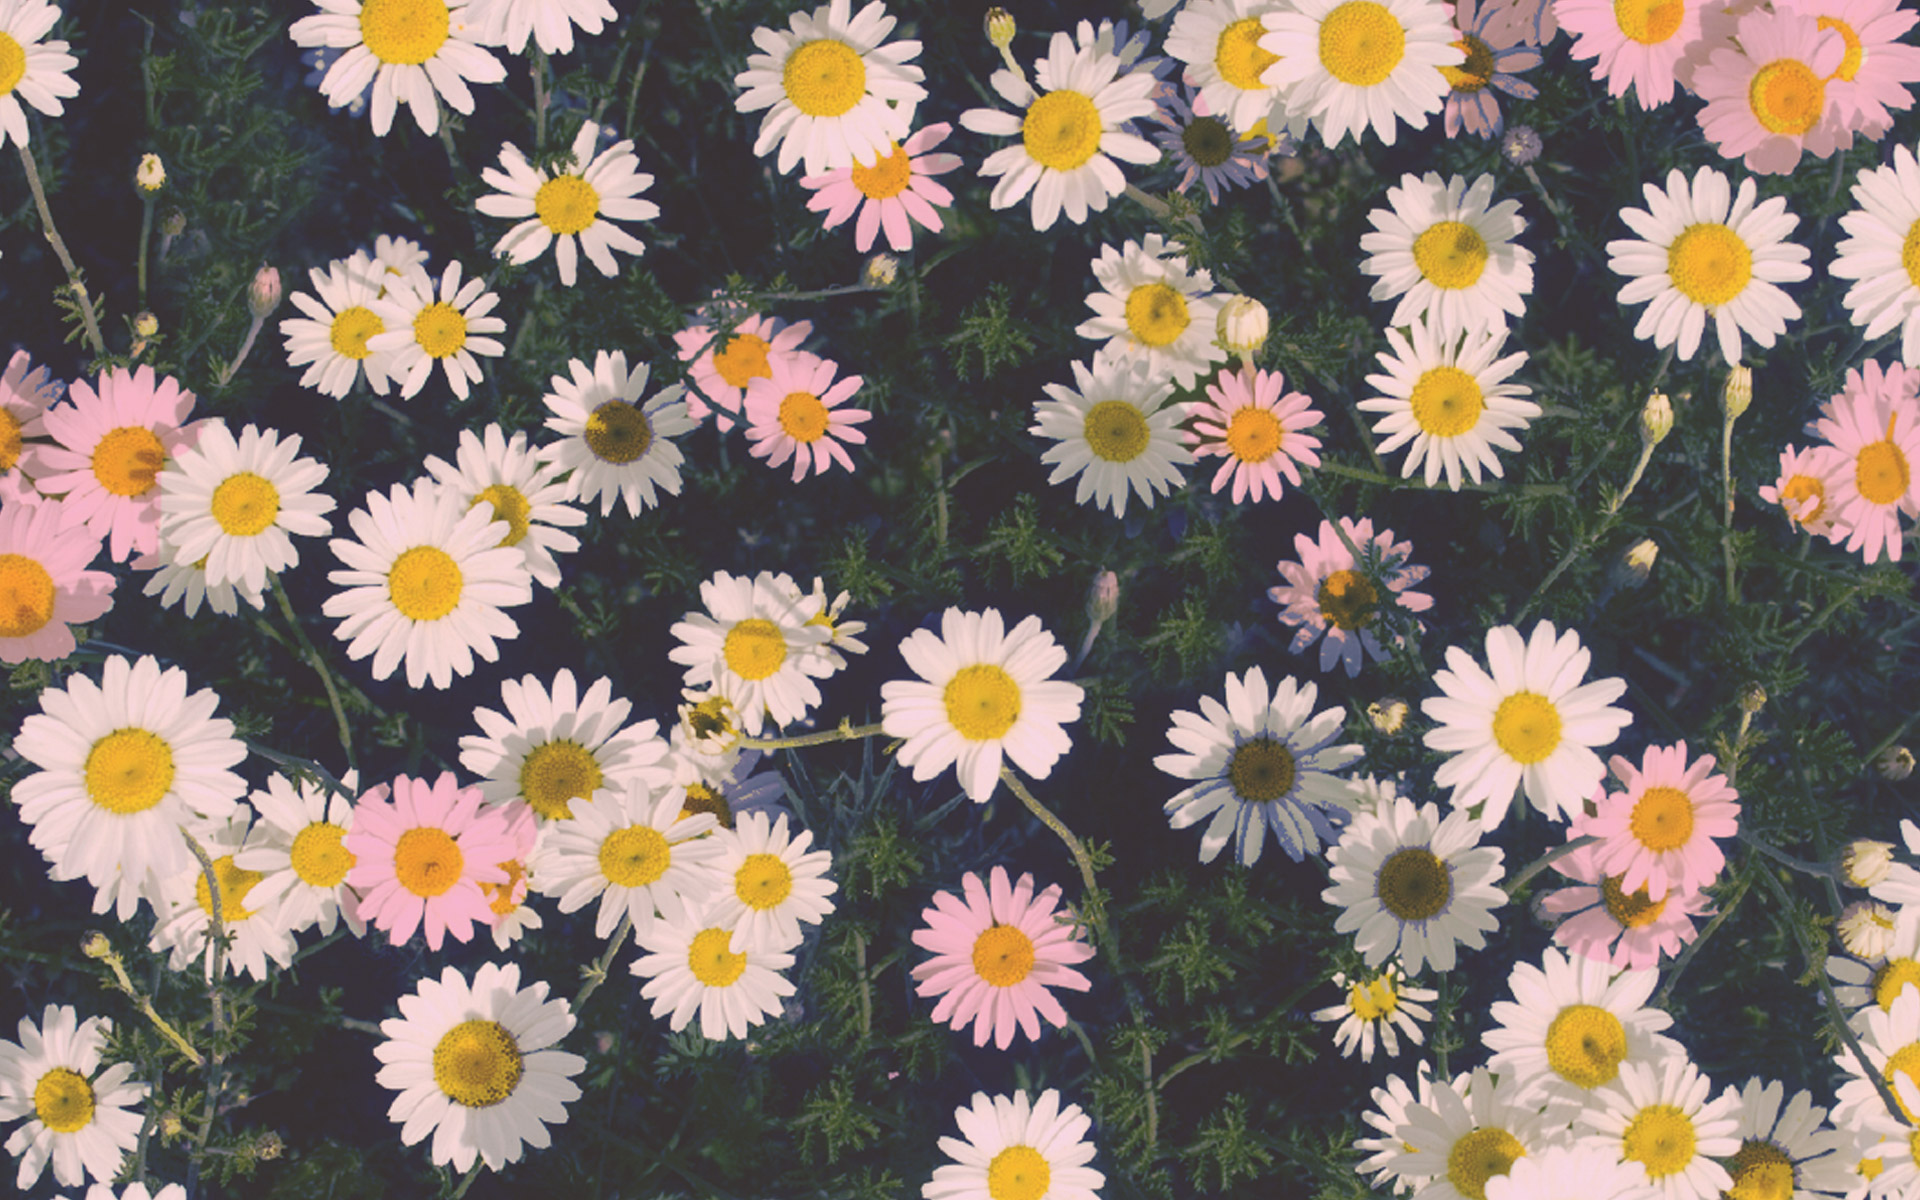 Daisies Background Daisies Background Nature Pictures to